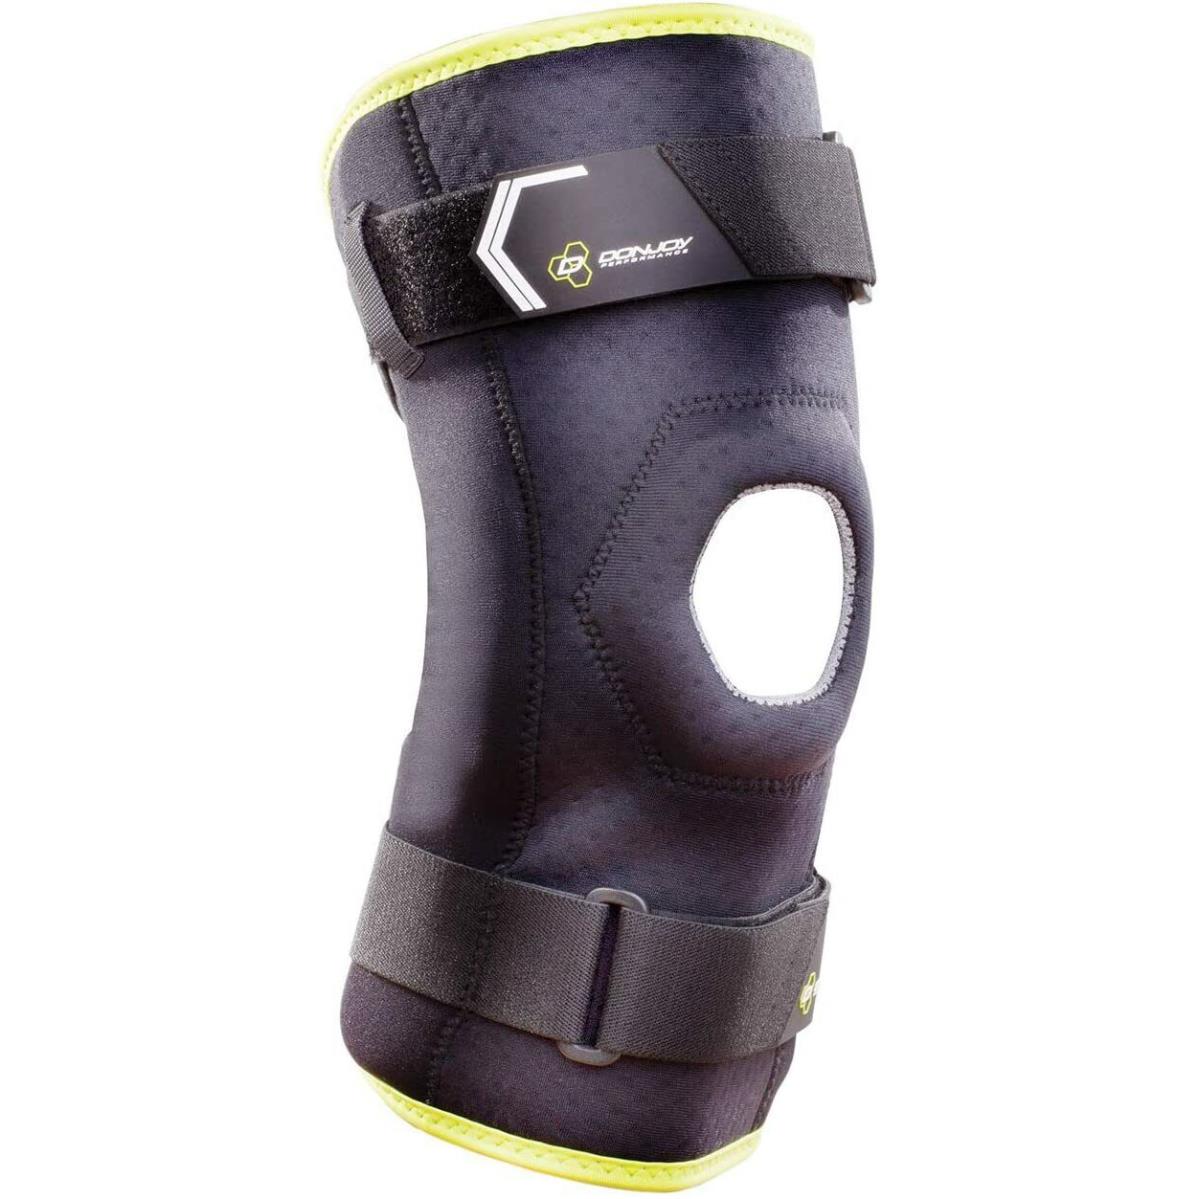 Donjoy Performance Bionic Comfort Hinged Knee Brace Sports Support Size S / M